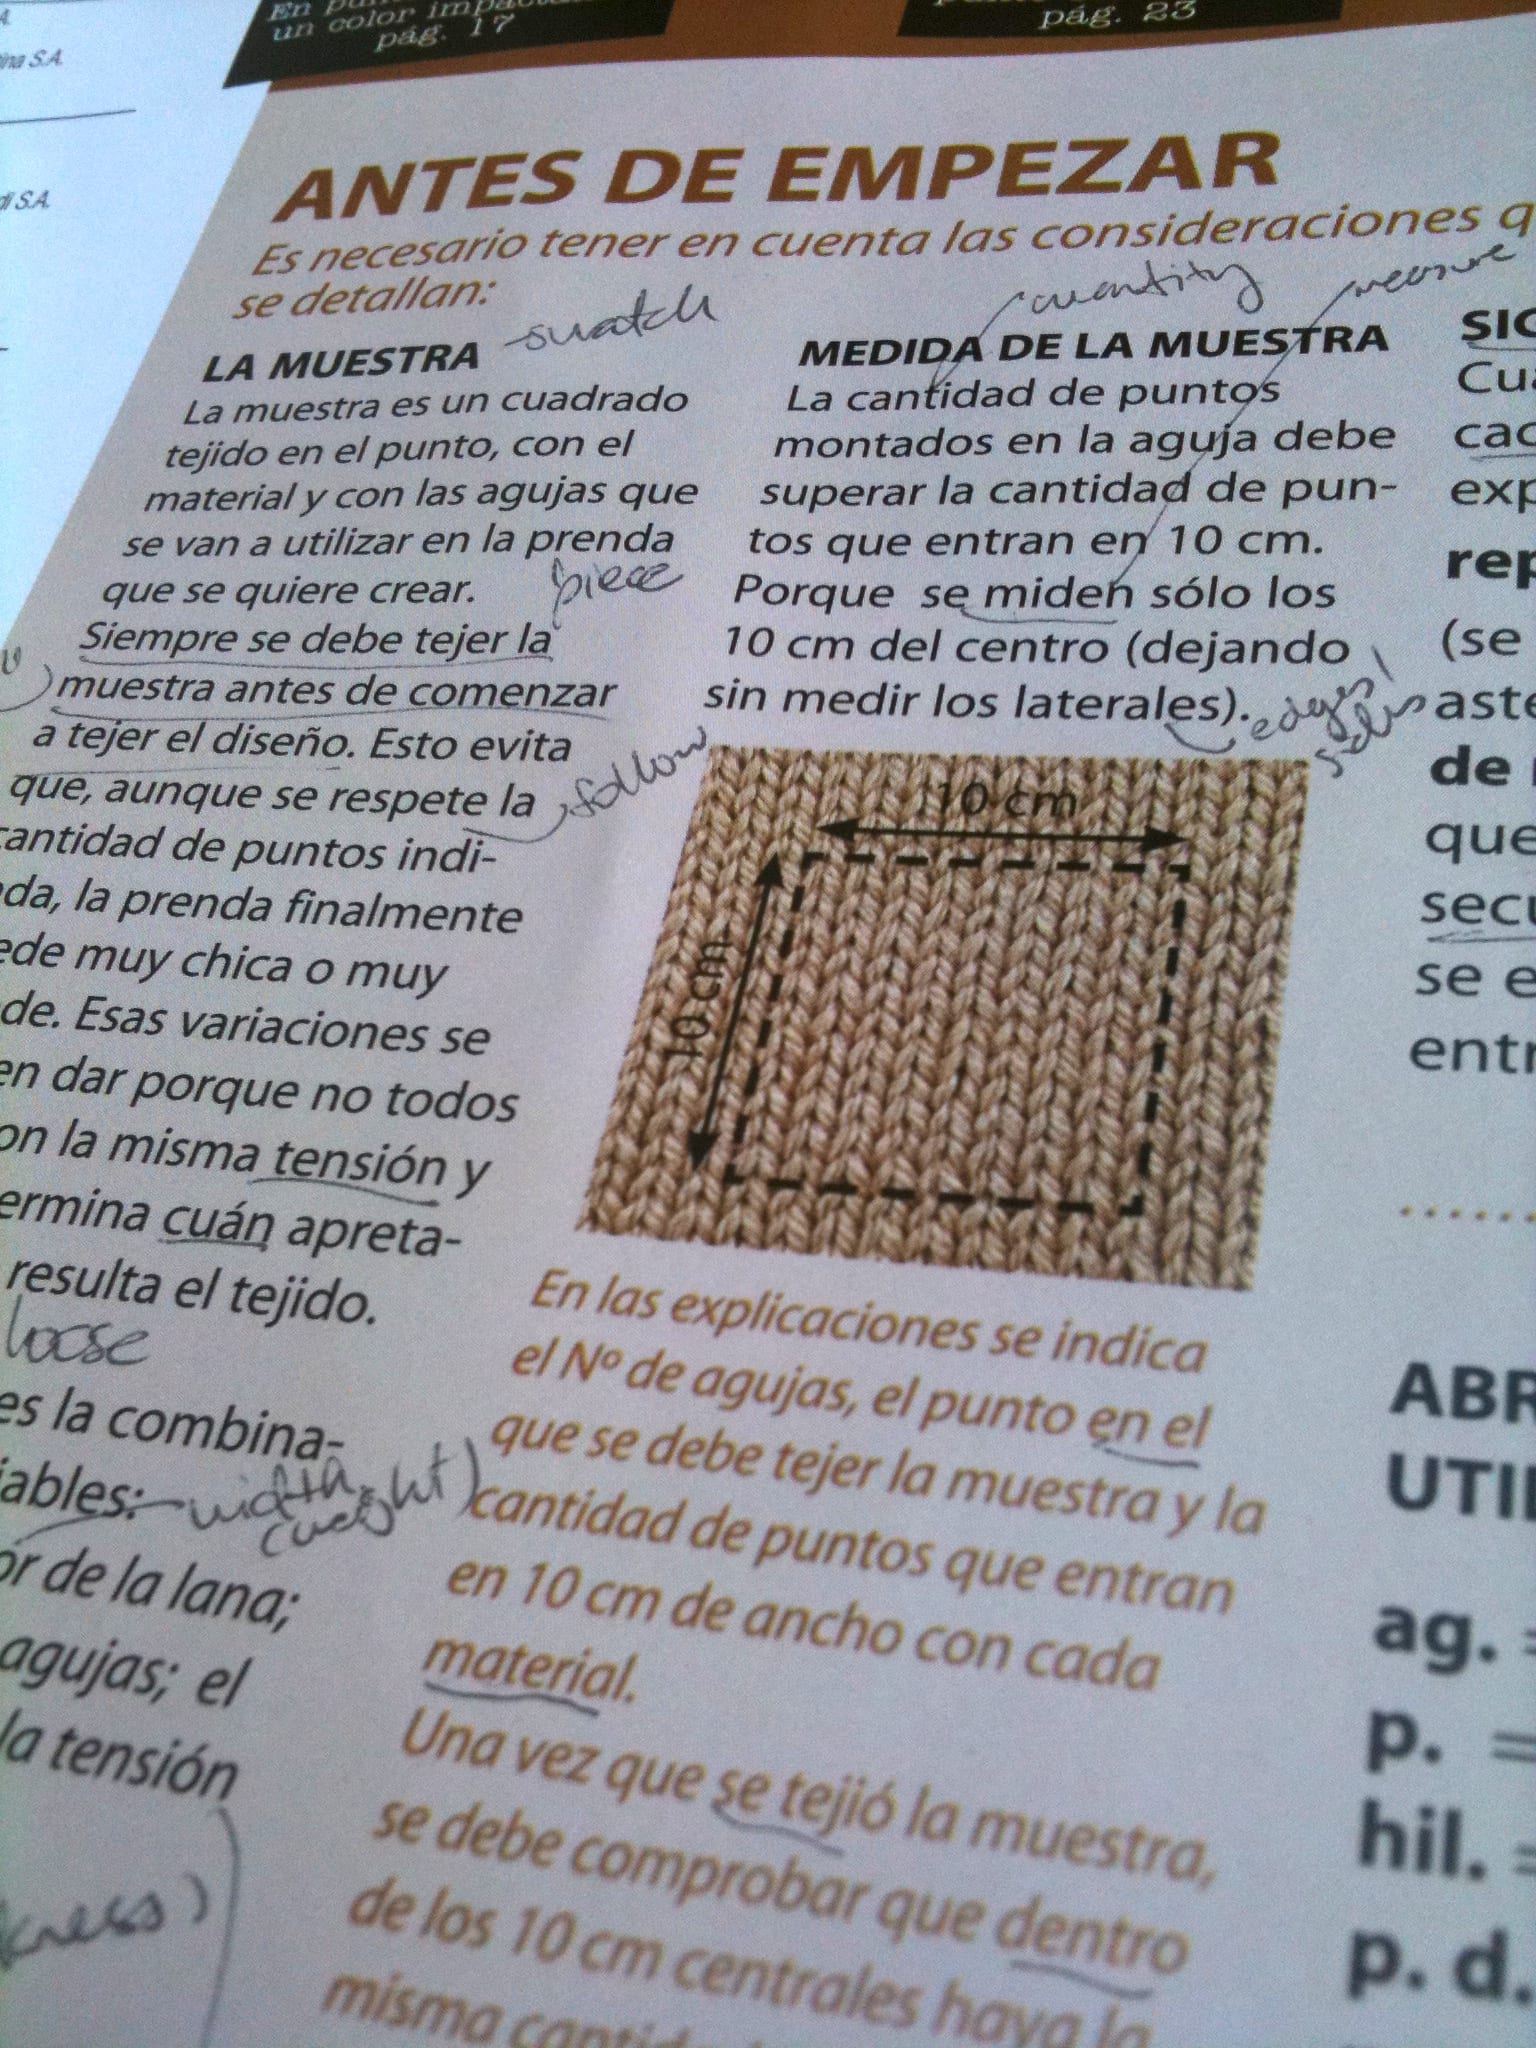 A page from a Spanish-language knitting magazine